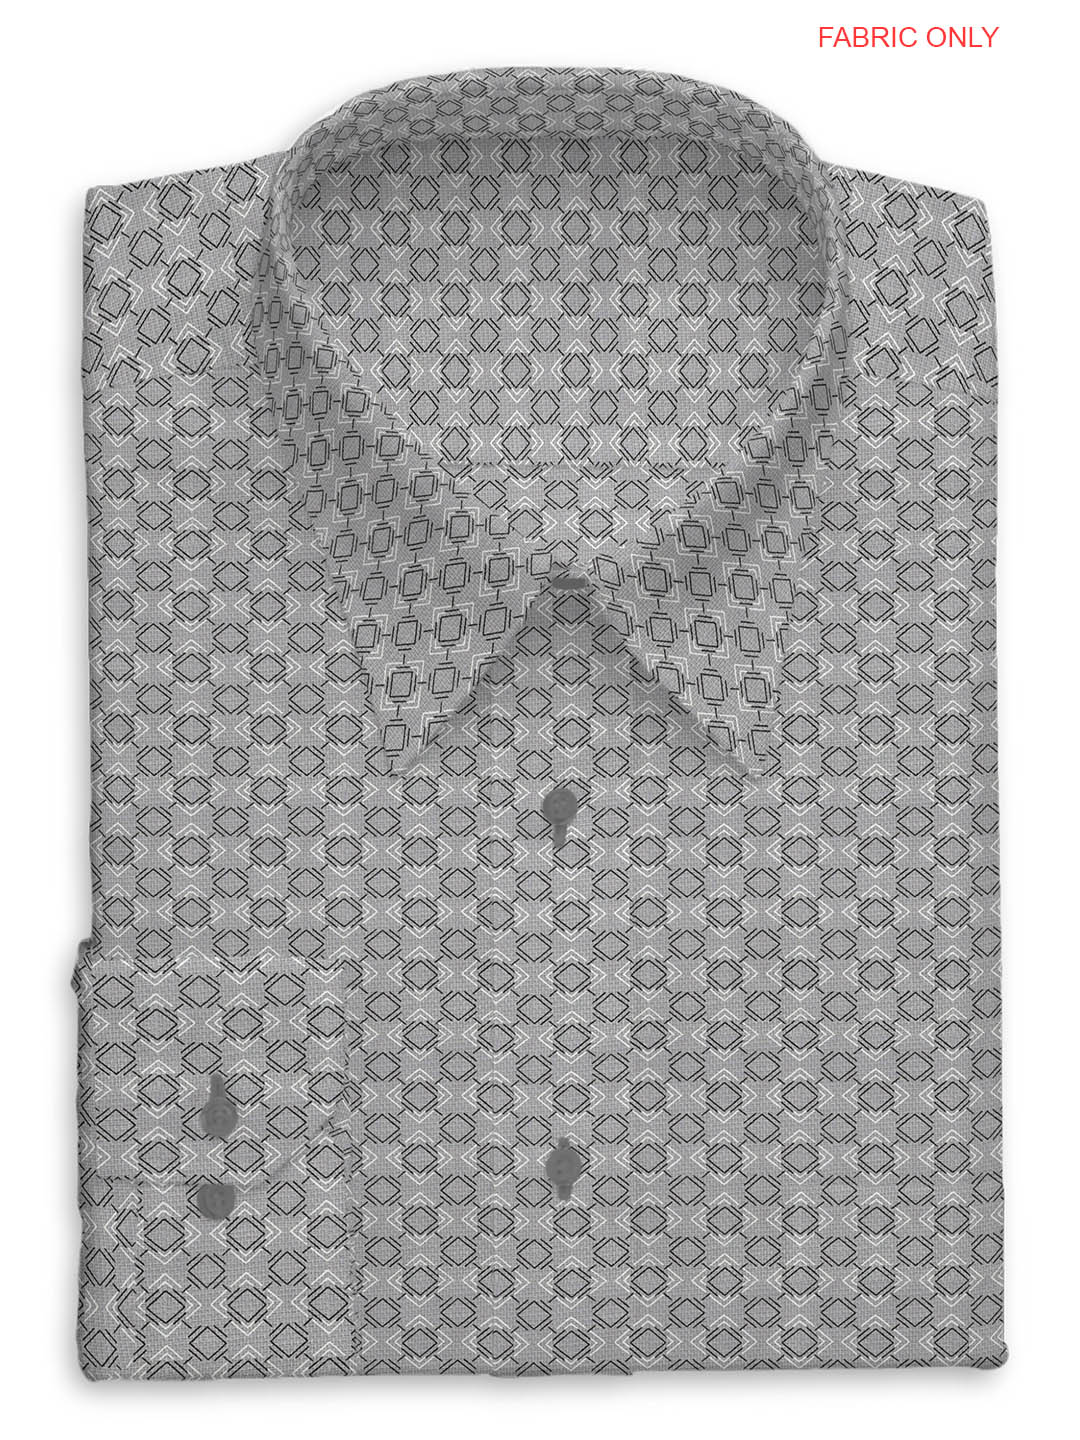 Cotton Grey with White Box type All-over Print Shirt Fabric OSLO